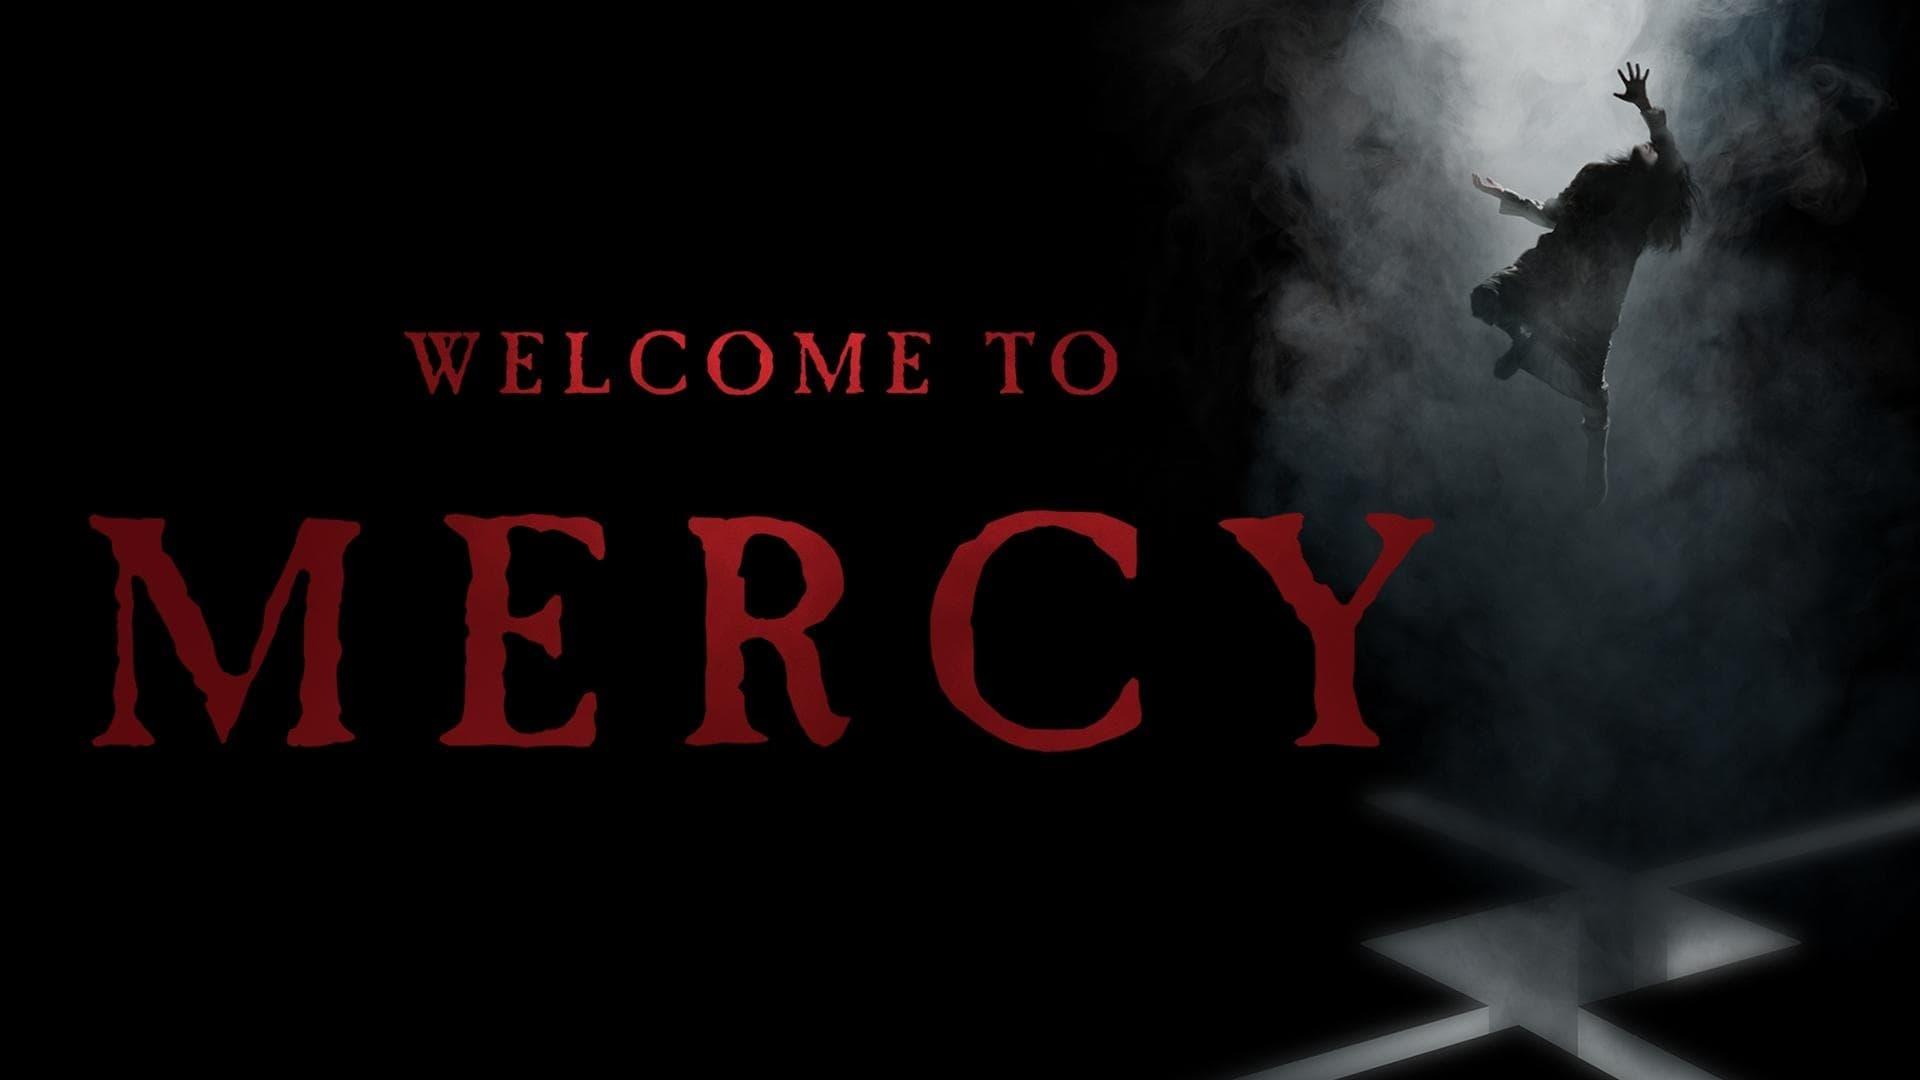 Welcome to Mercy backdrop